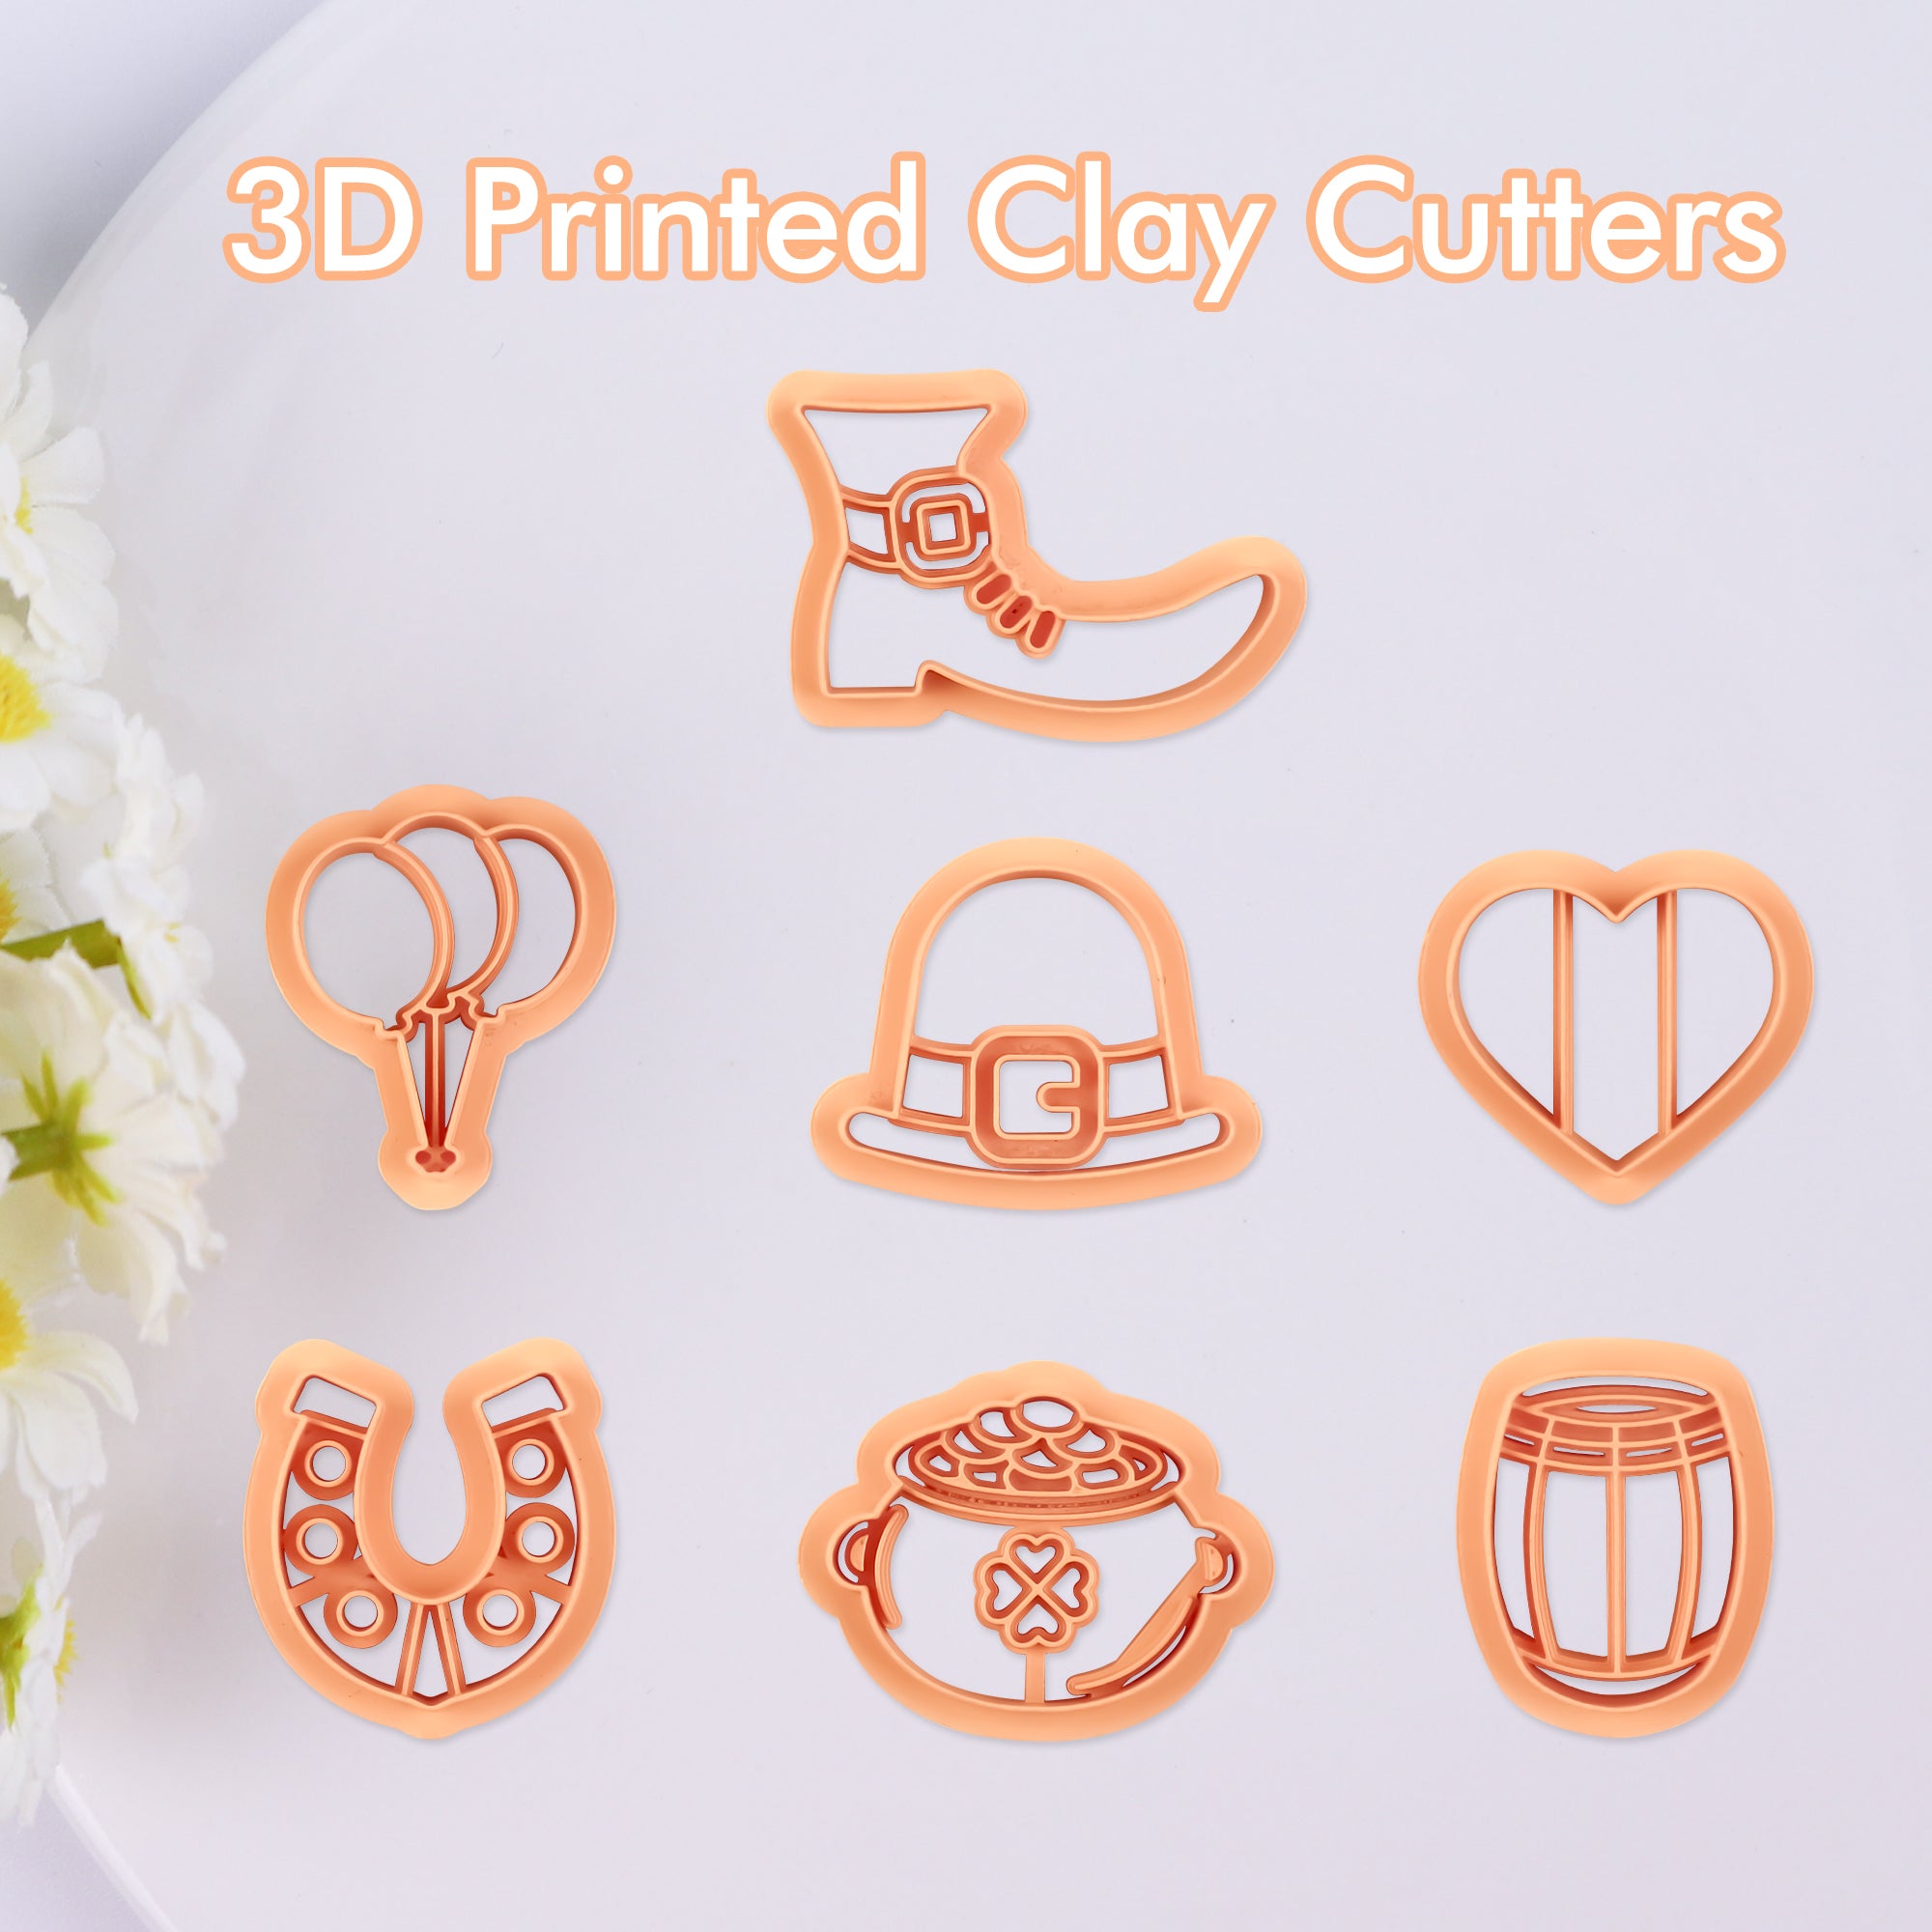 Puocaon St Patrick Clay Cutters 7 Pcs